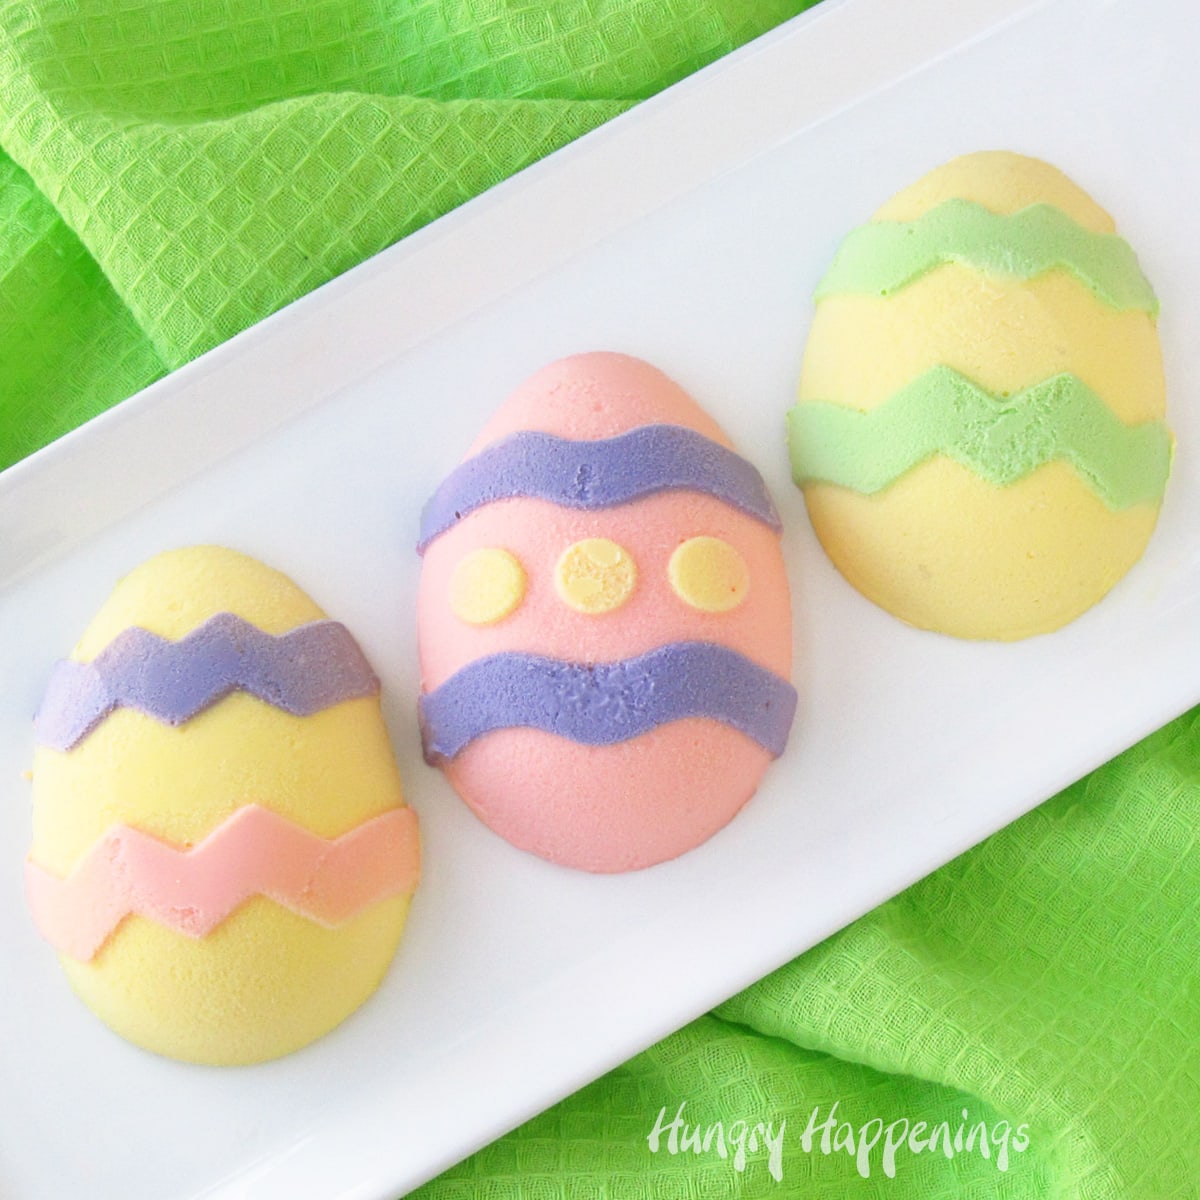 yellow and pink pastel-colored hand-painted cheesecake Easter eggs on a white plate on a green napkin.